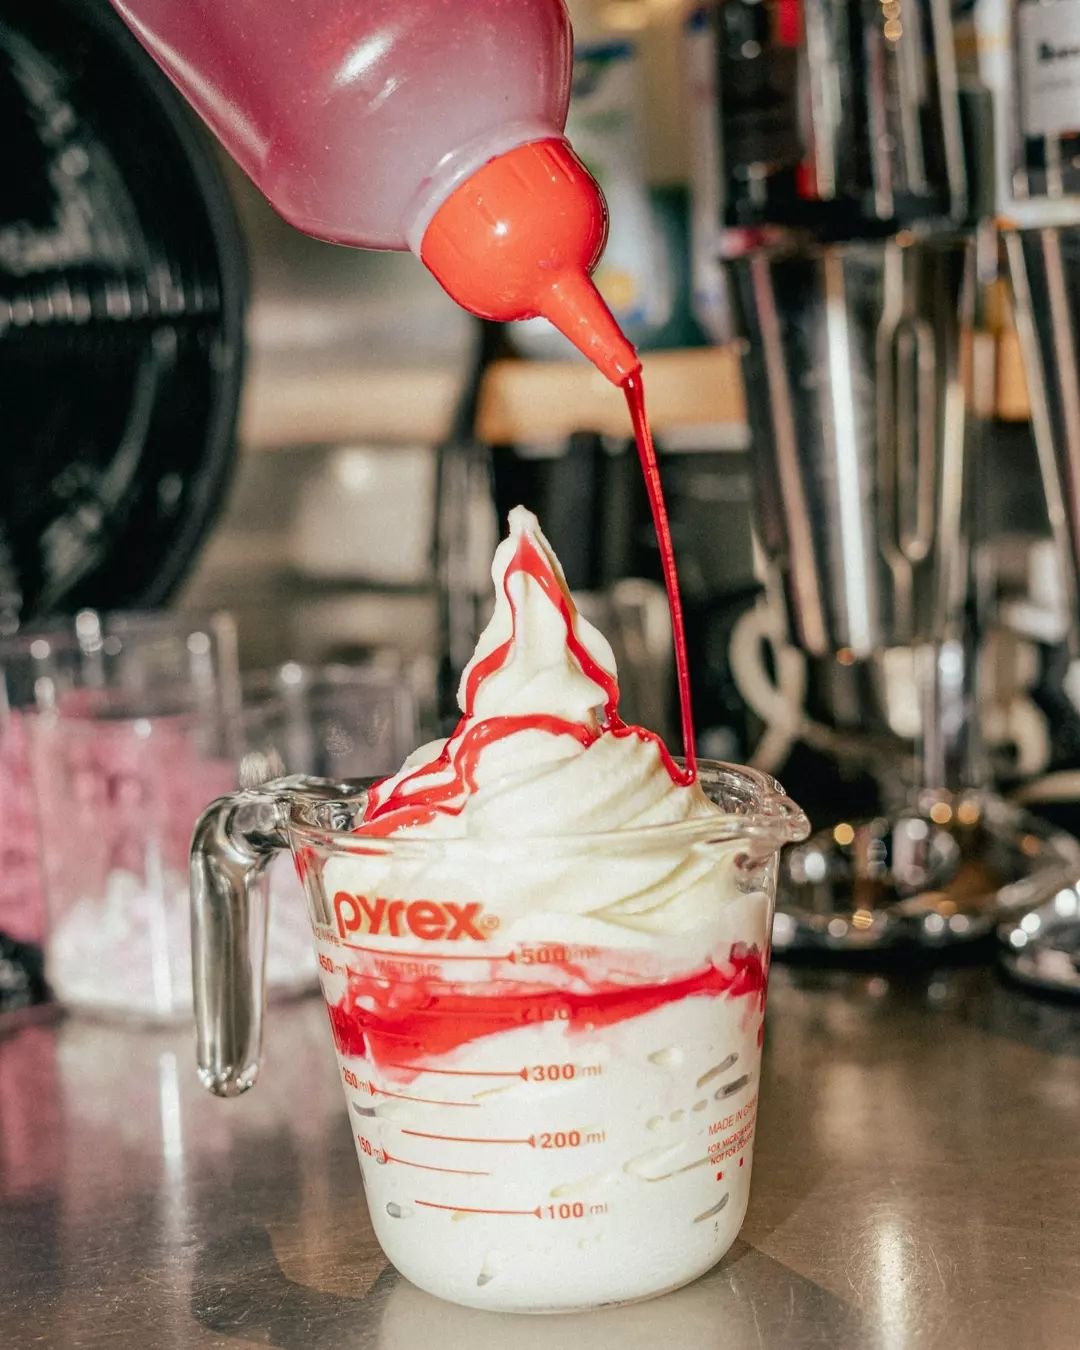 Our soft serve Sundaes are the perfect sweet treat&nbsp;🍦

Get your bookings in through the link in our bio and treat the whole family!